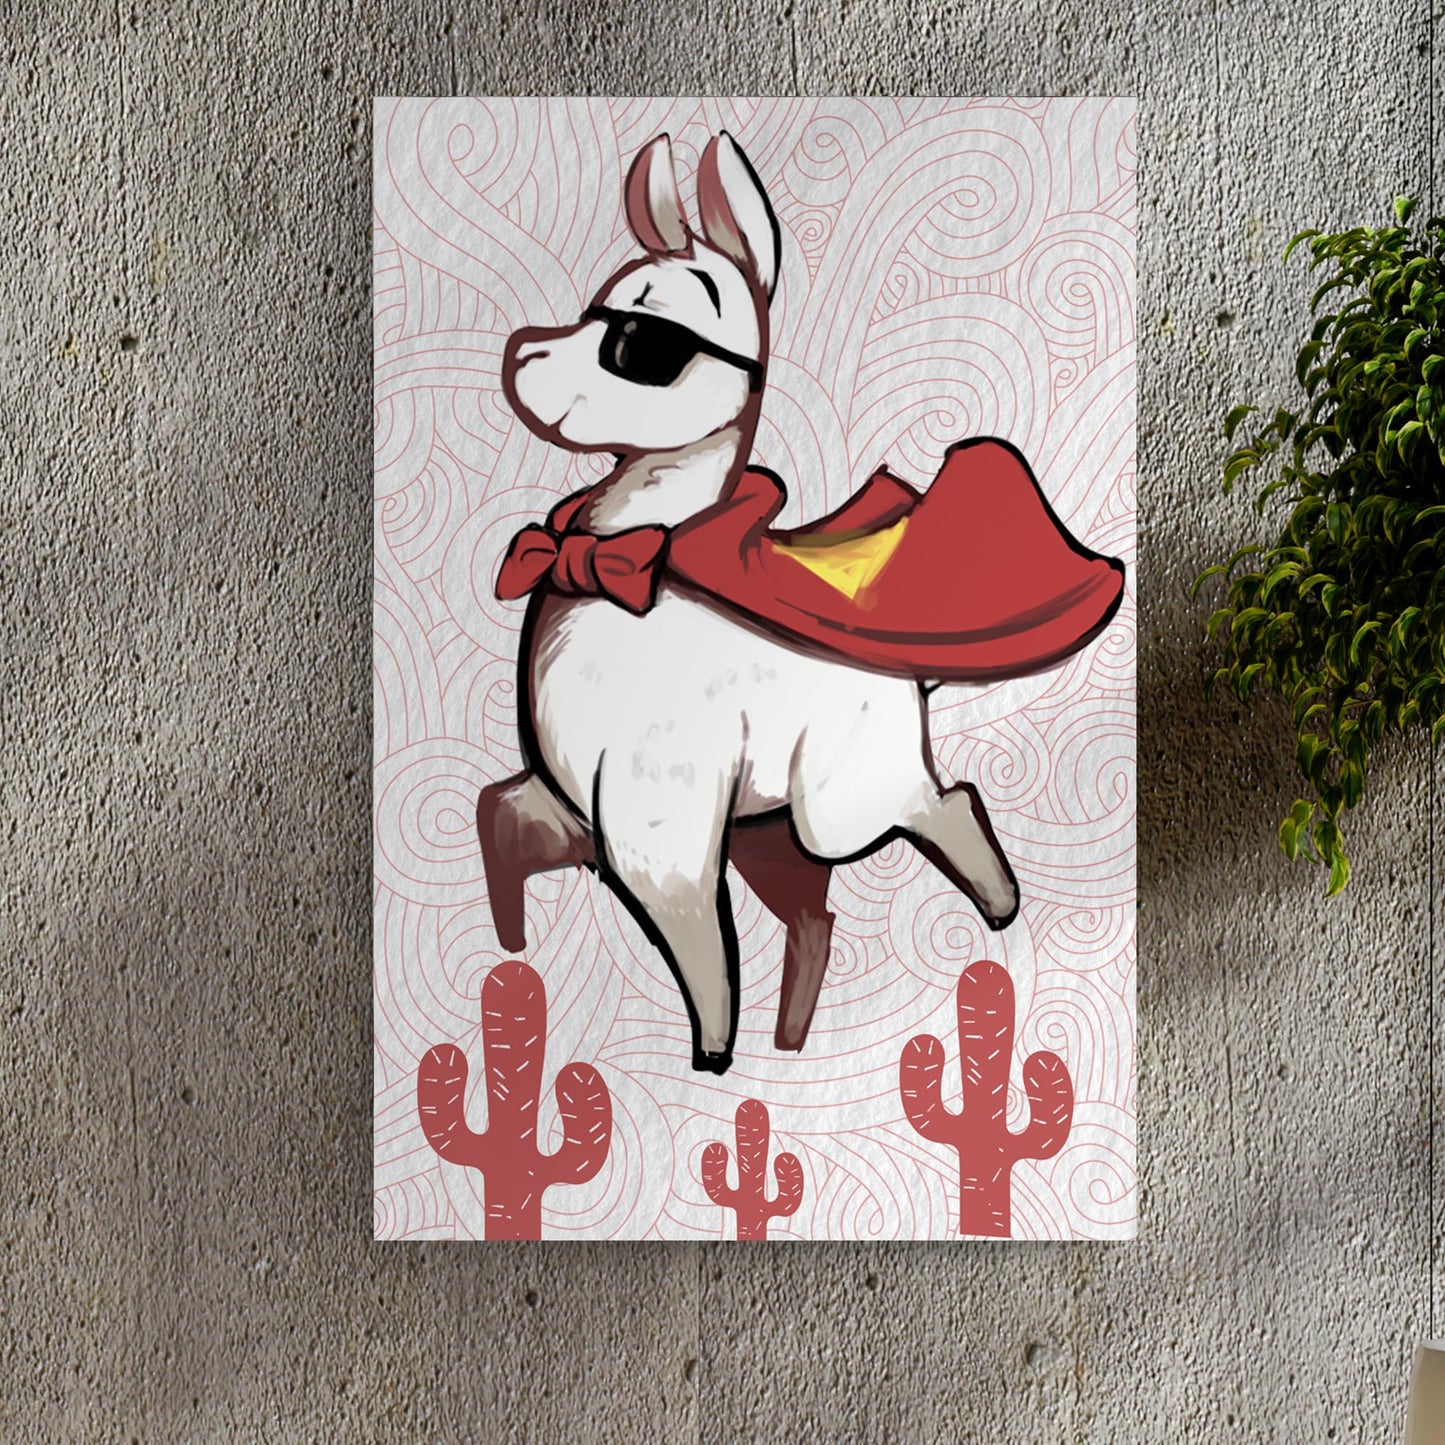 Cute Superhero Llama Portrait Canvas Wall Art - Image by Tailored Canvases